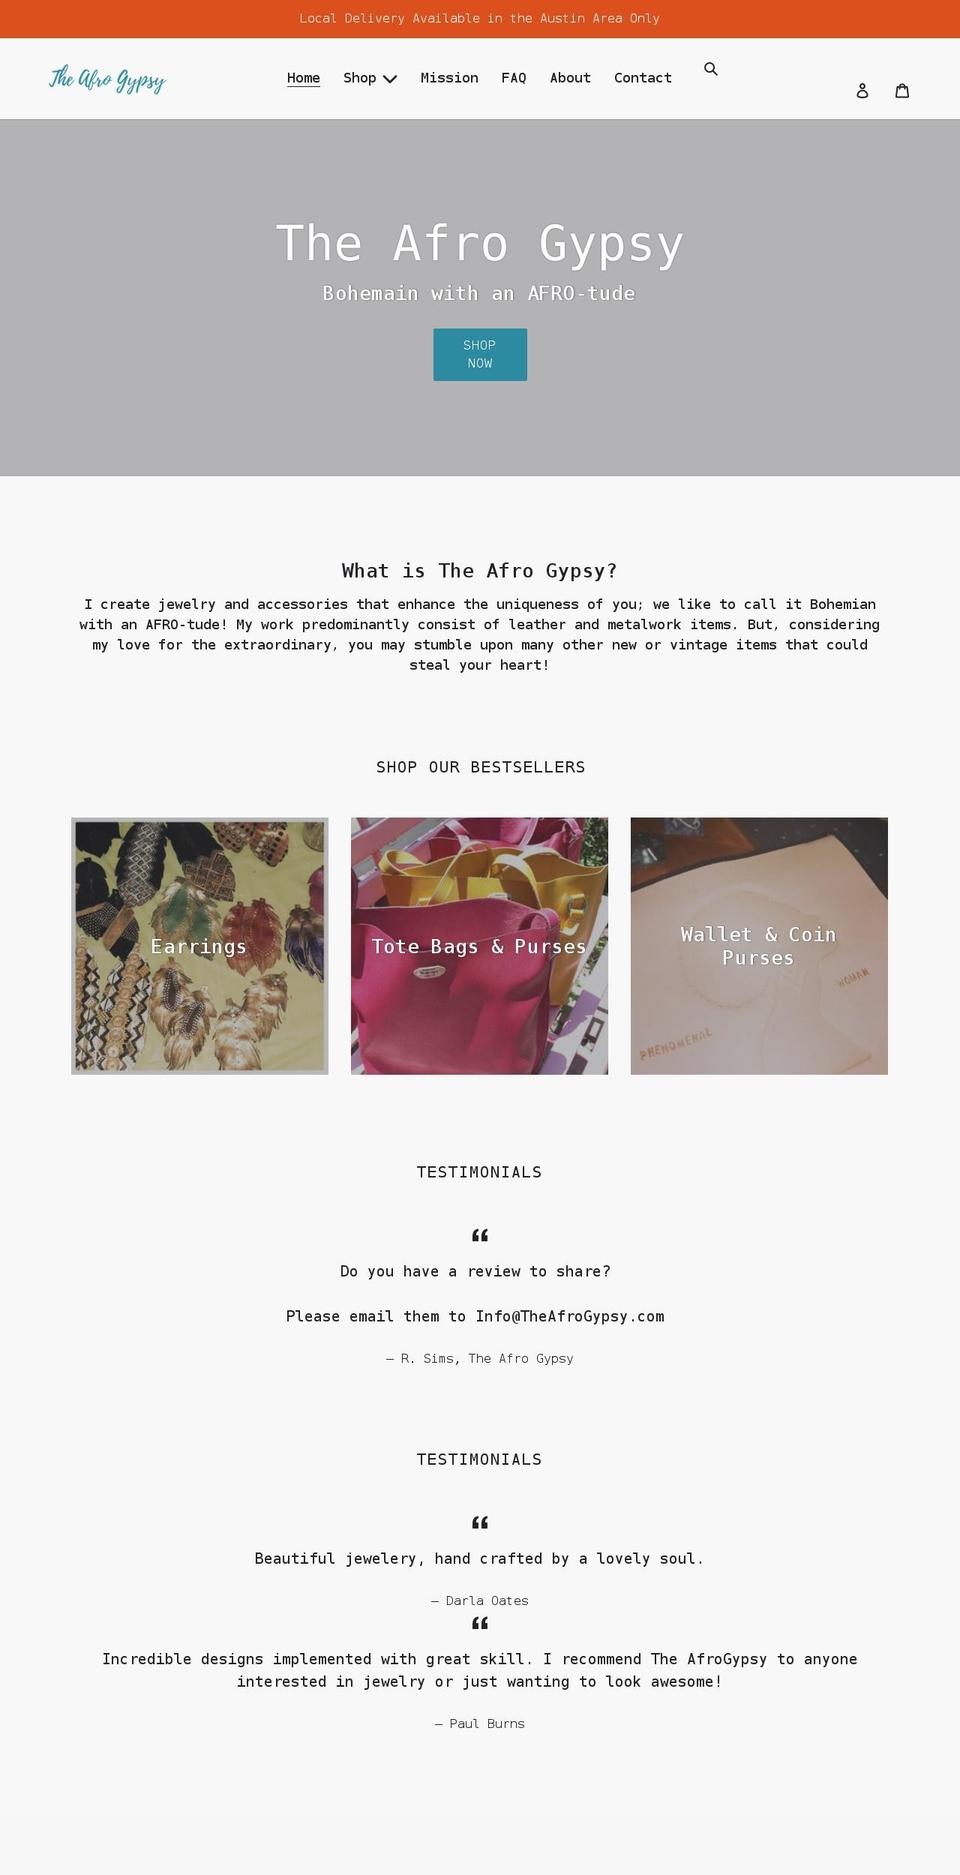 Creative Shopify theme site example theafrogypsy.com